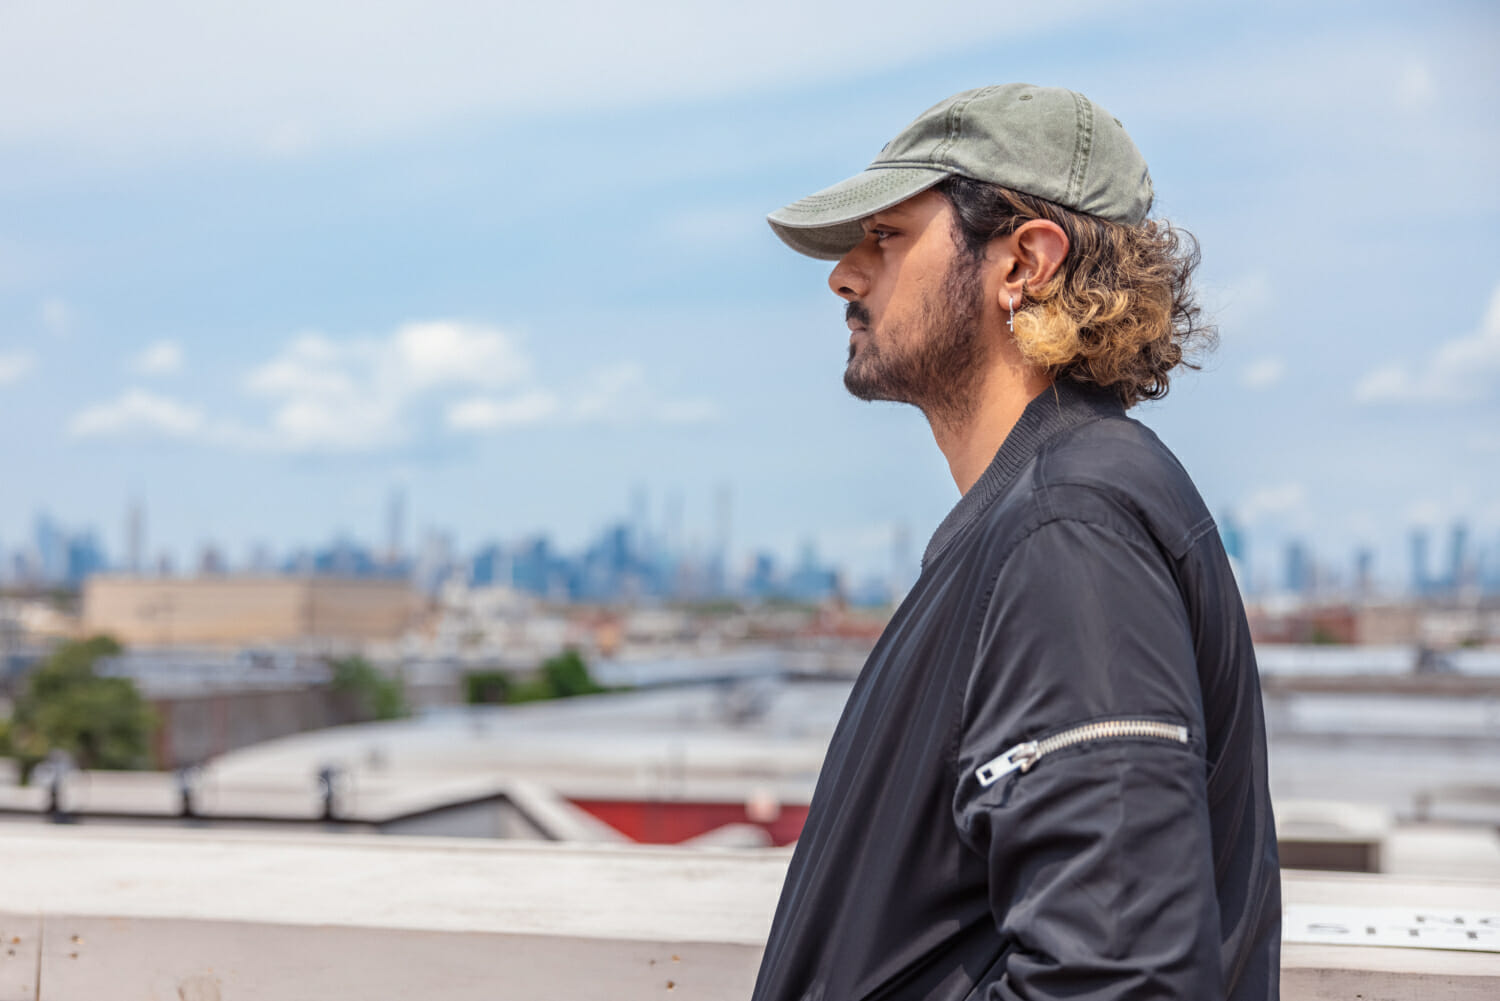 Premiere Jai Wolf journeys back in time with minidocumentary ahead of